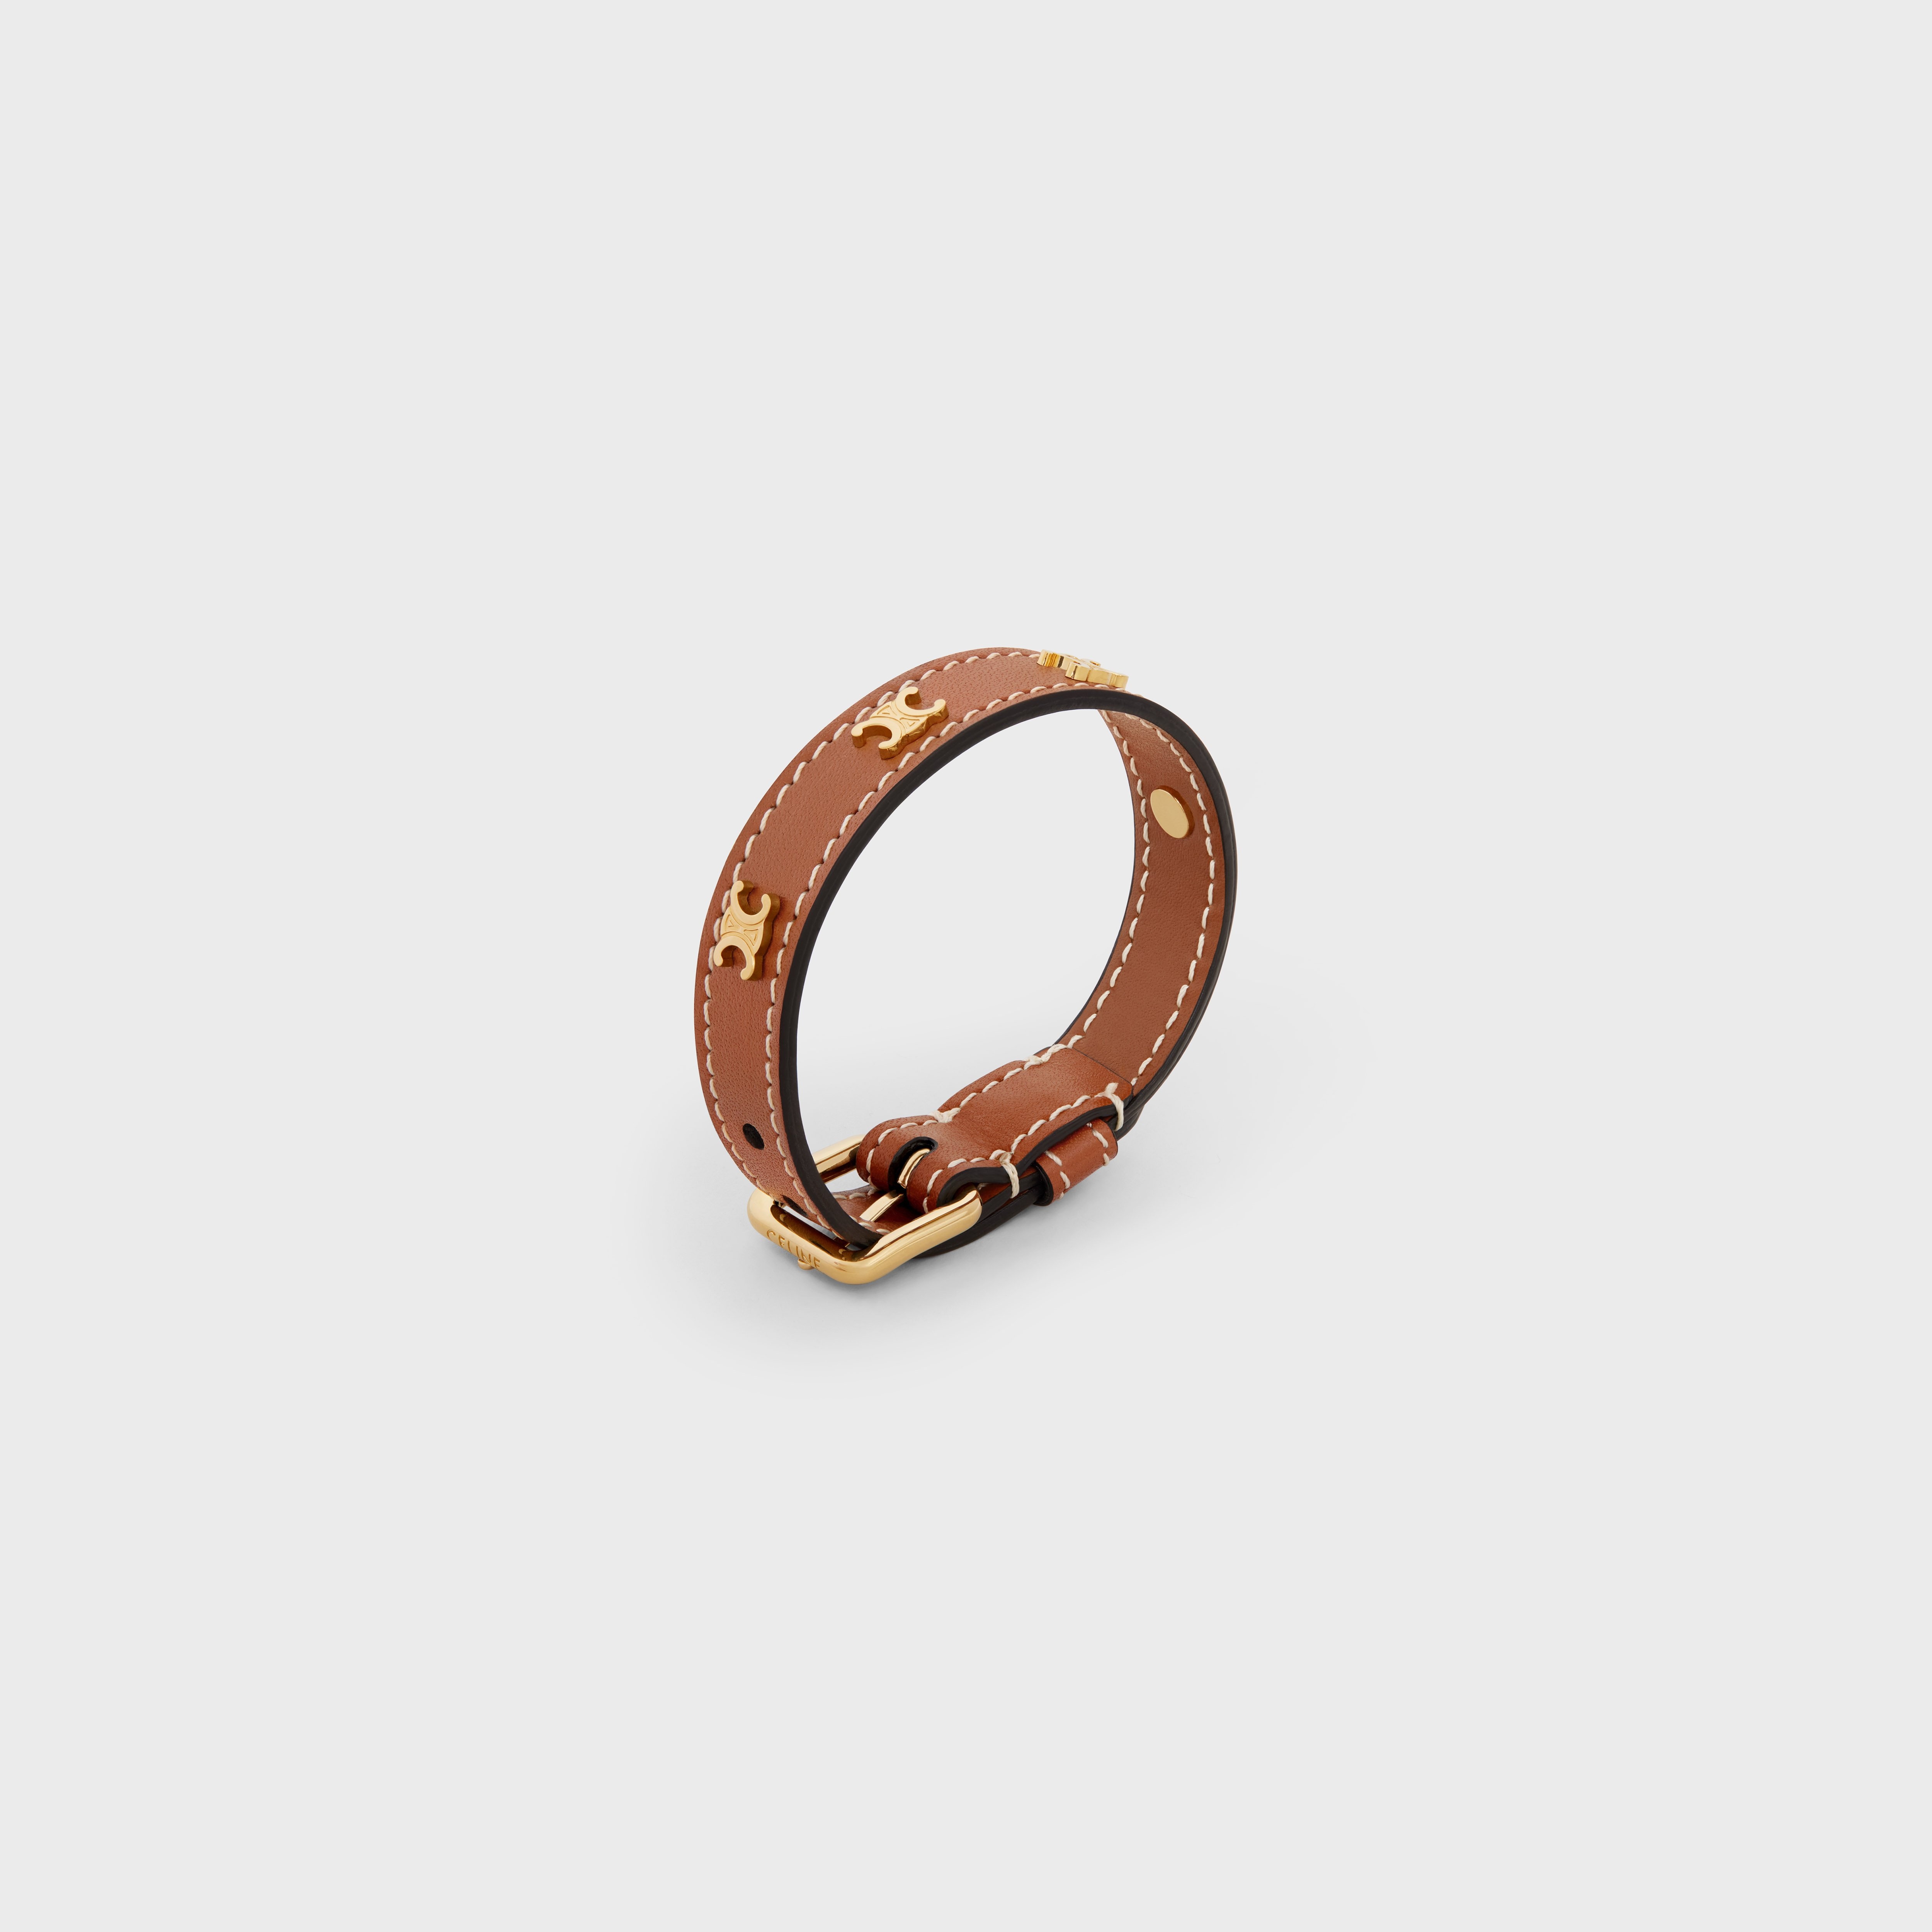 Les Cuirs Celine Bracelet in Calfskin and Brass with Gold Finish - 2